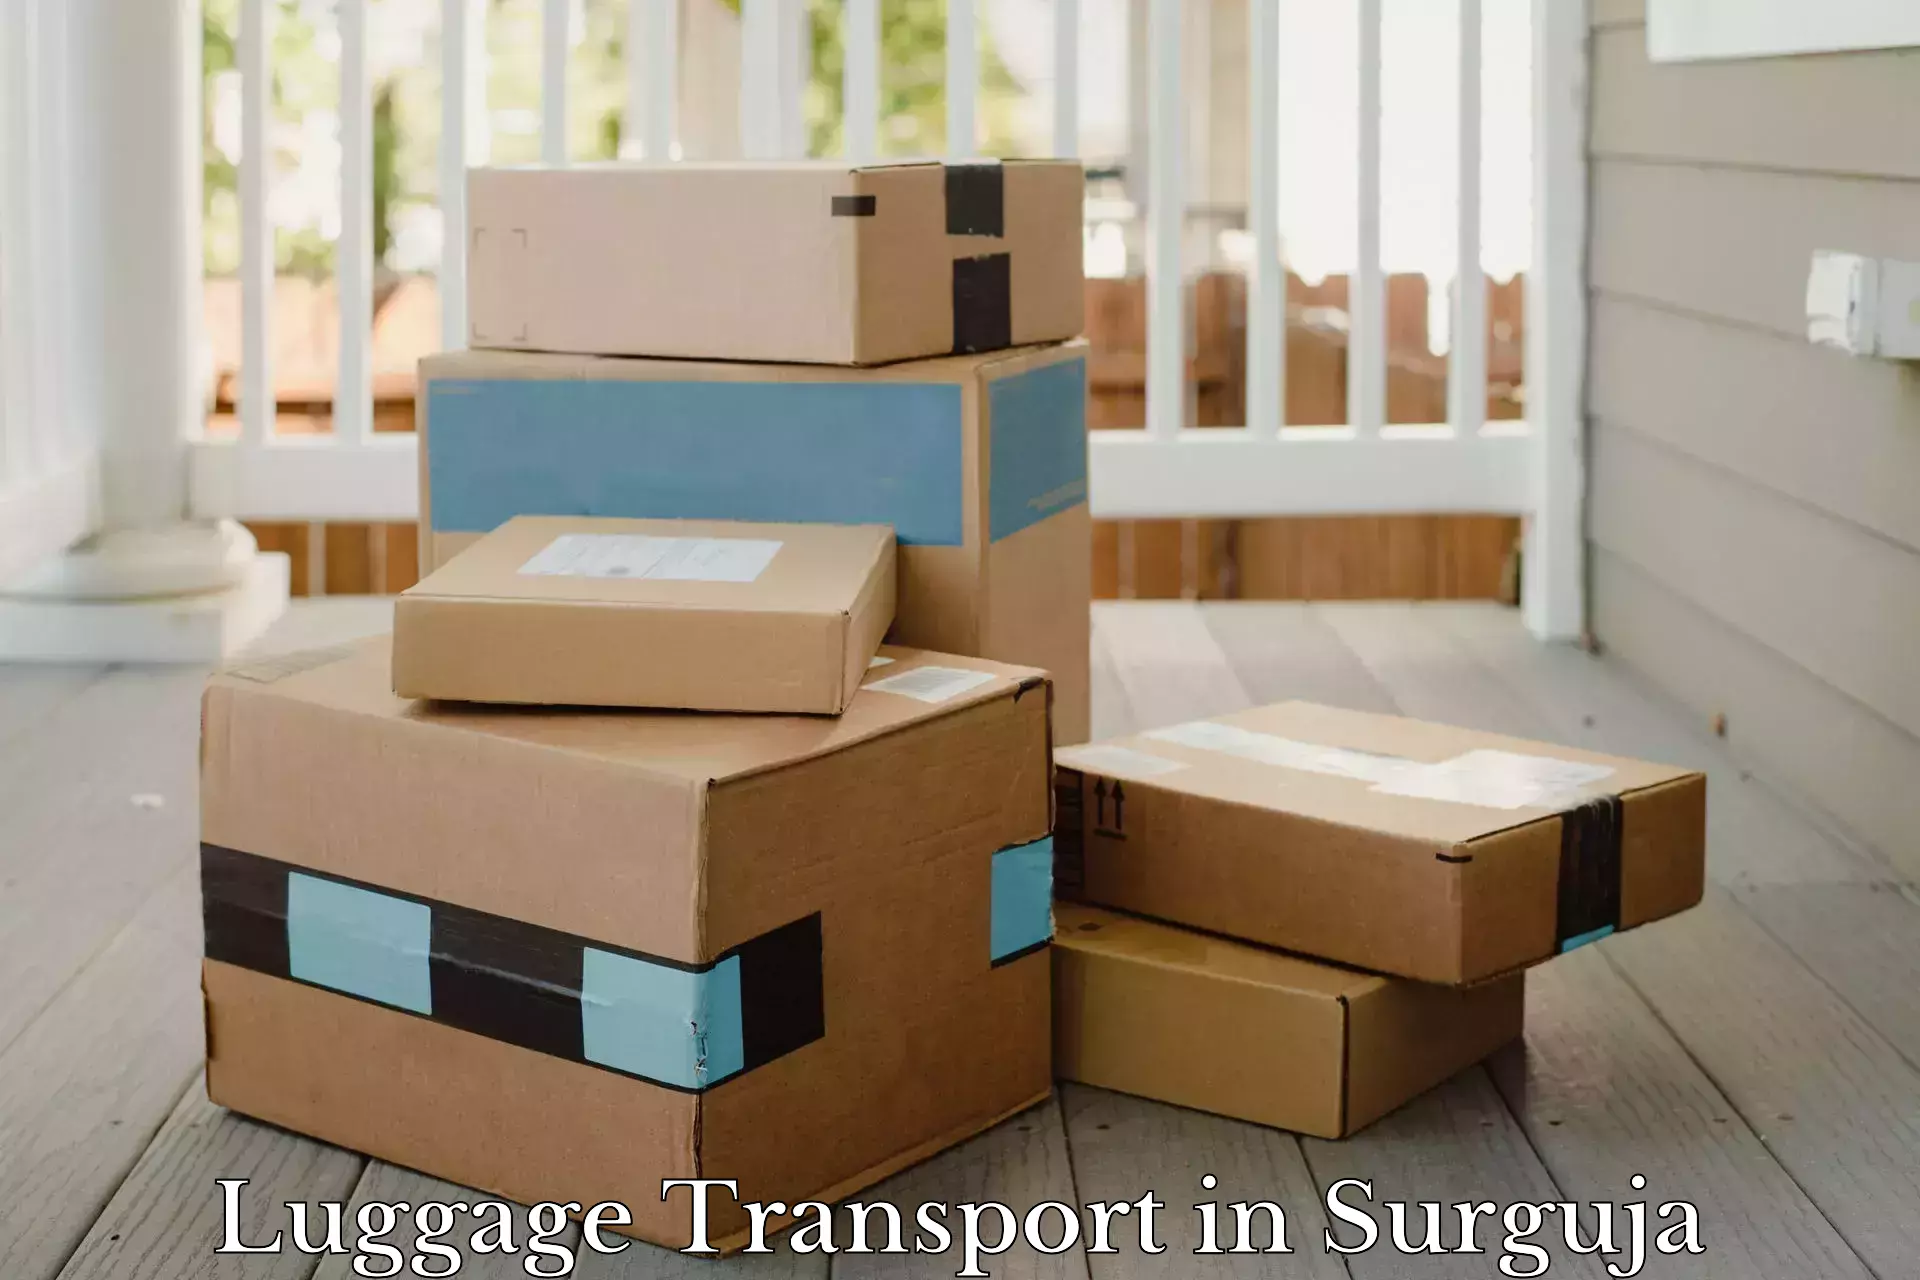 Baggage transport cost in Surguja